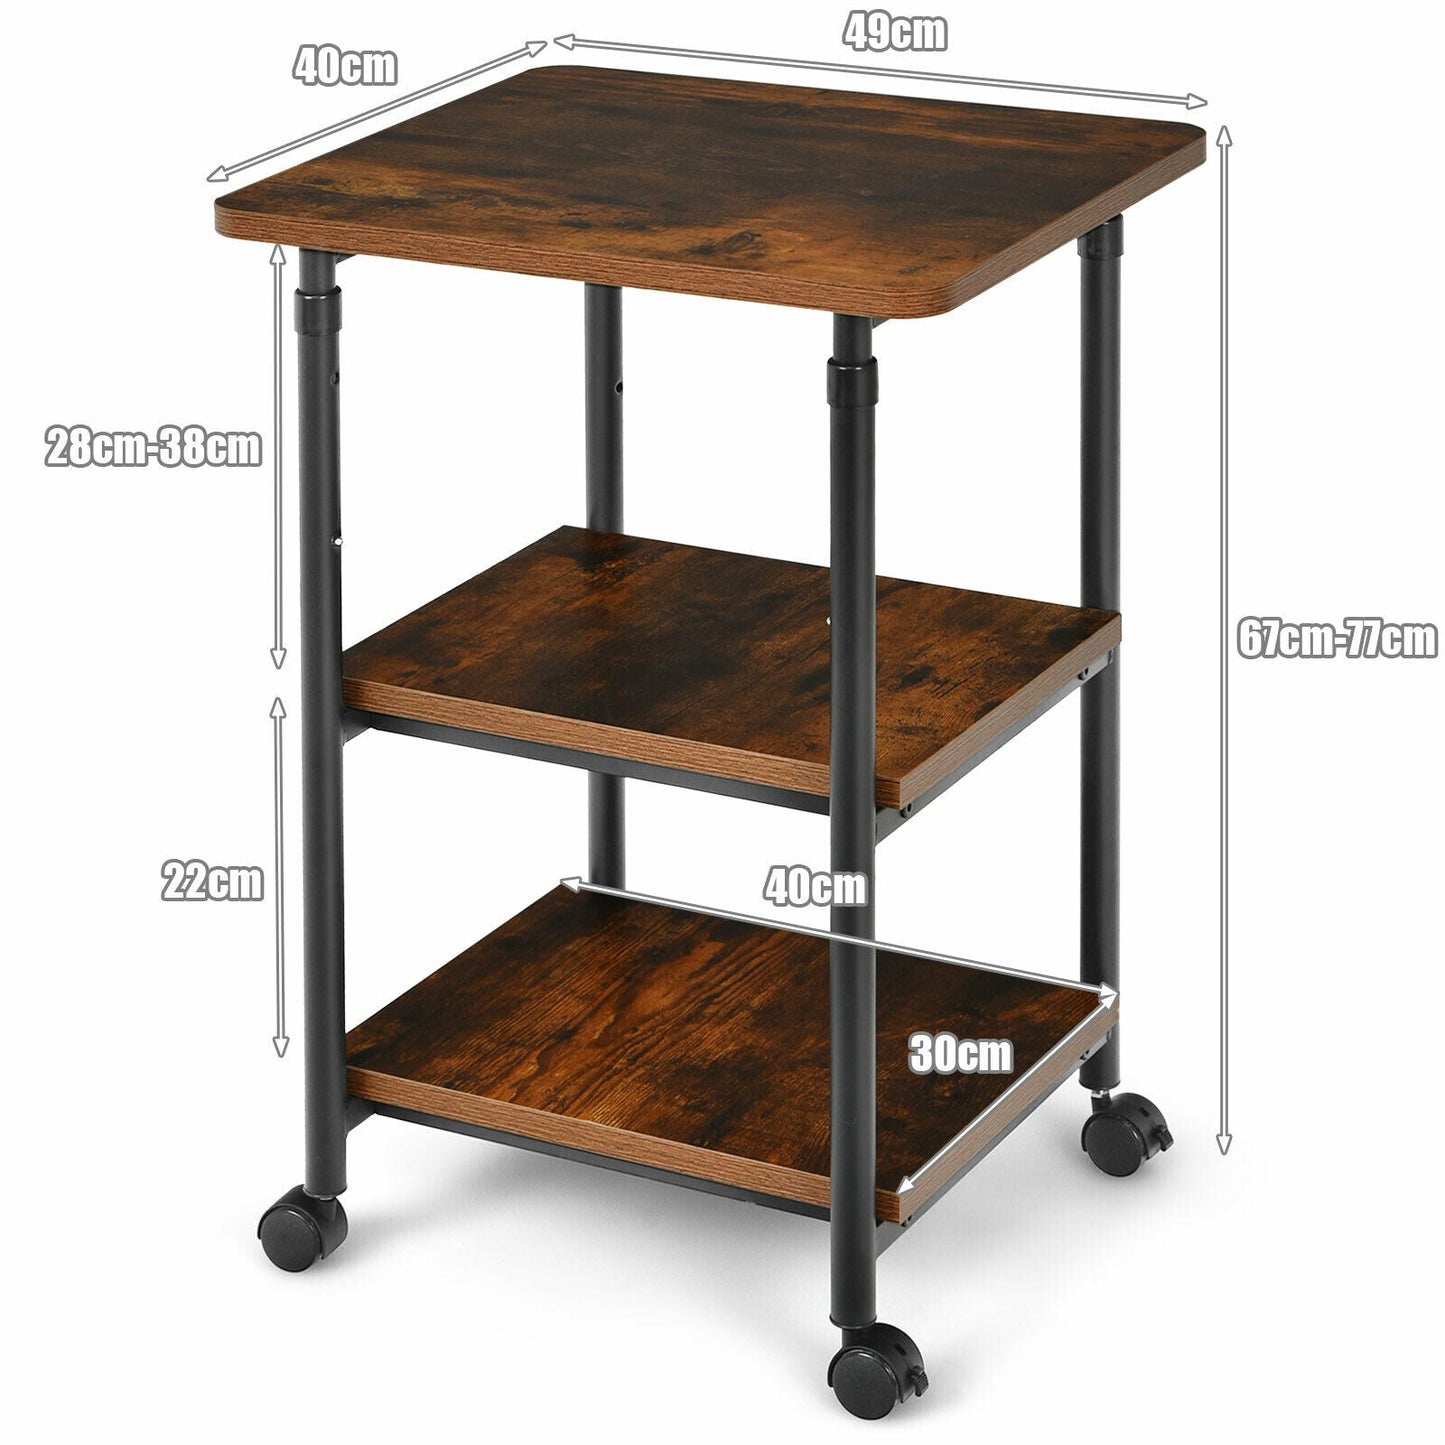 3 Tier Height Adjustable Printer Stand / Wheeled Occasional Table-Brown